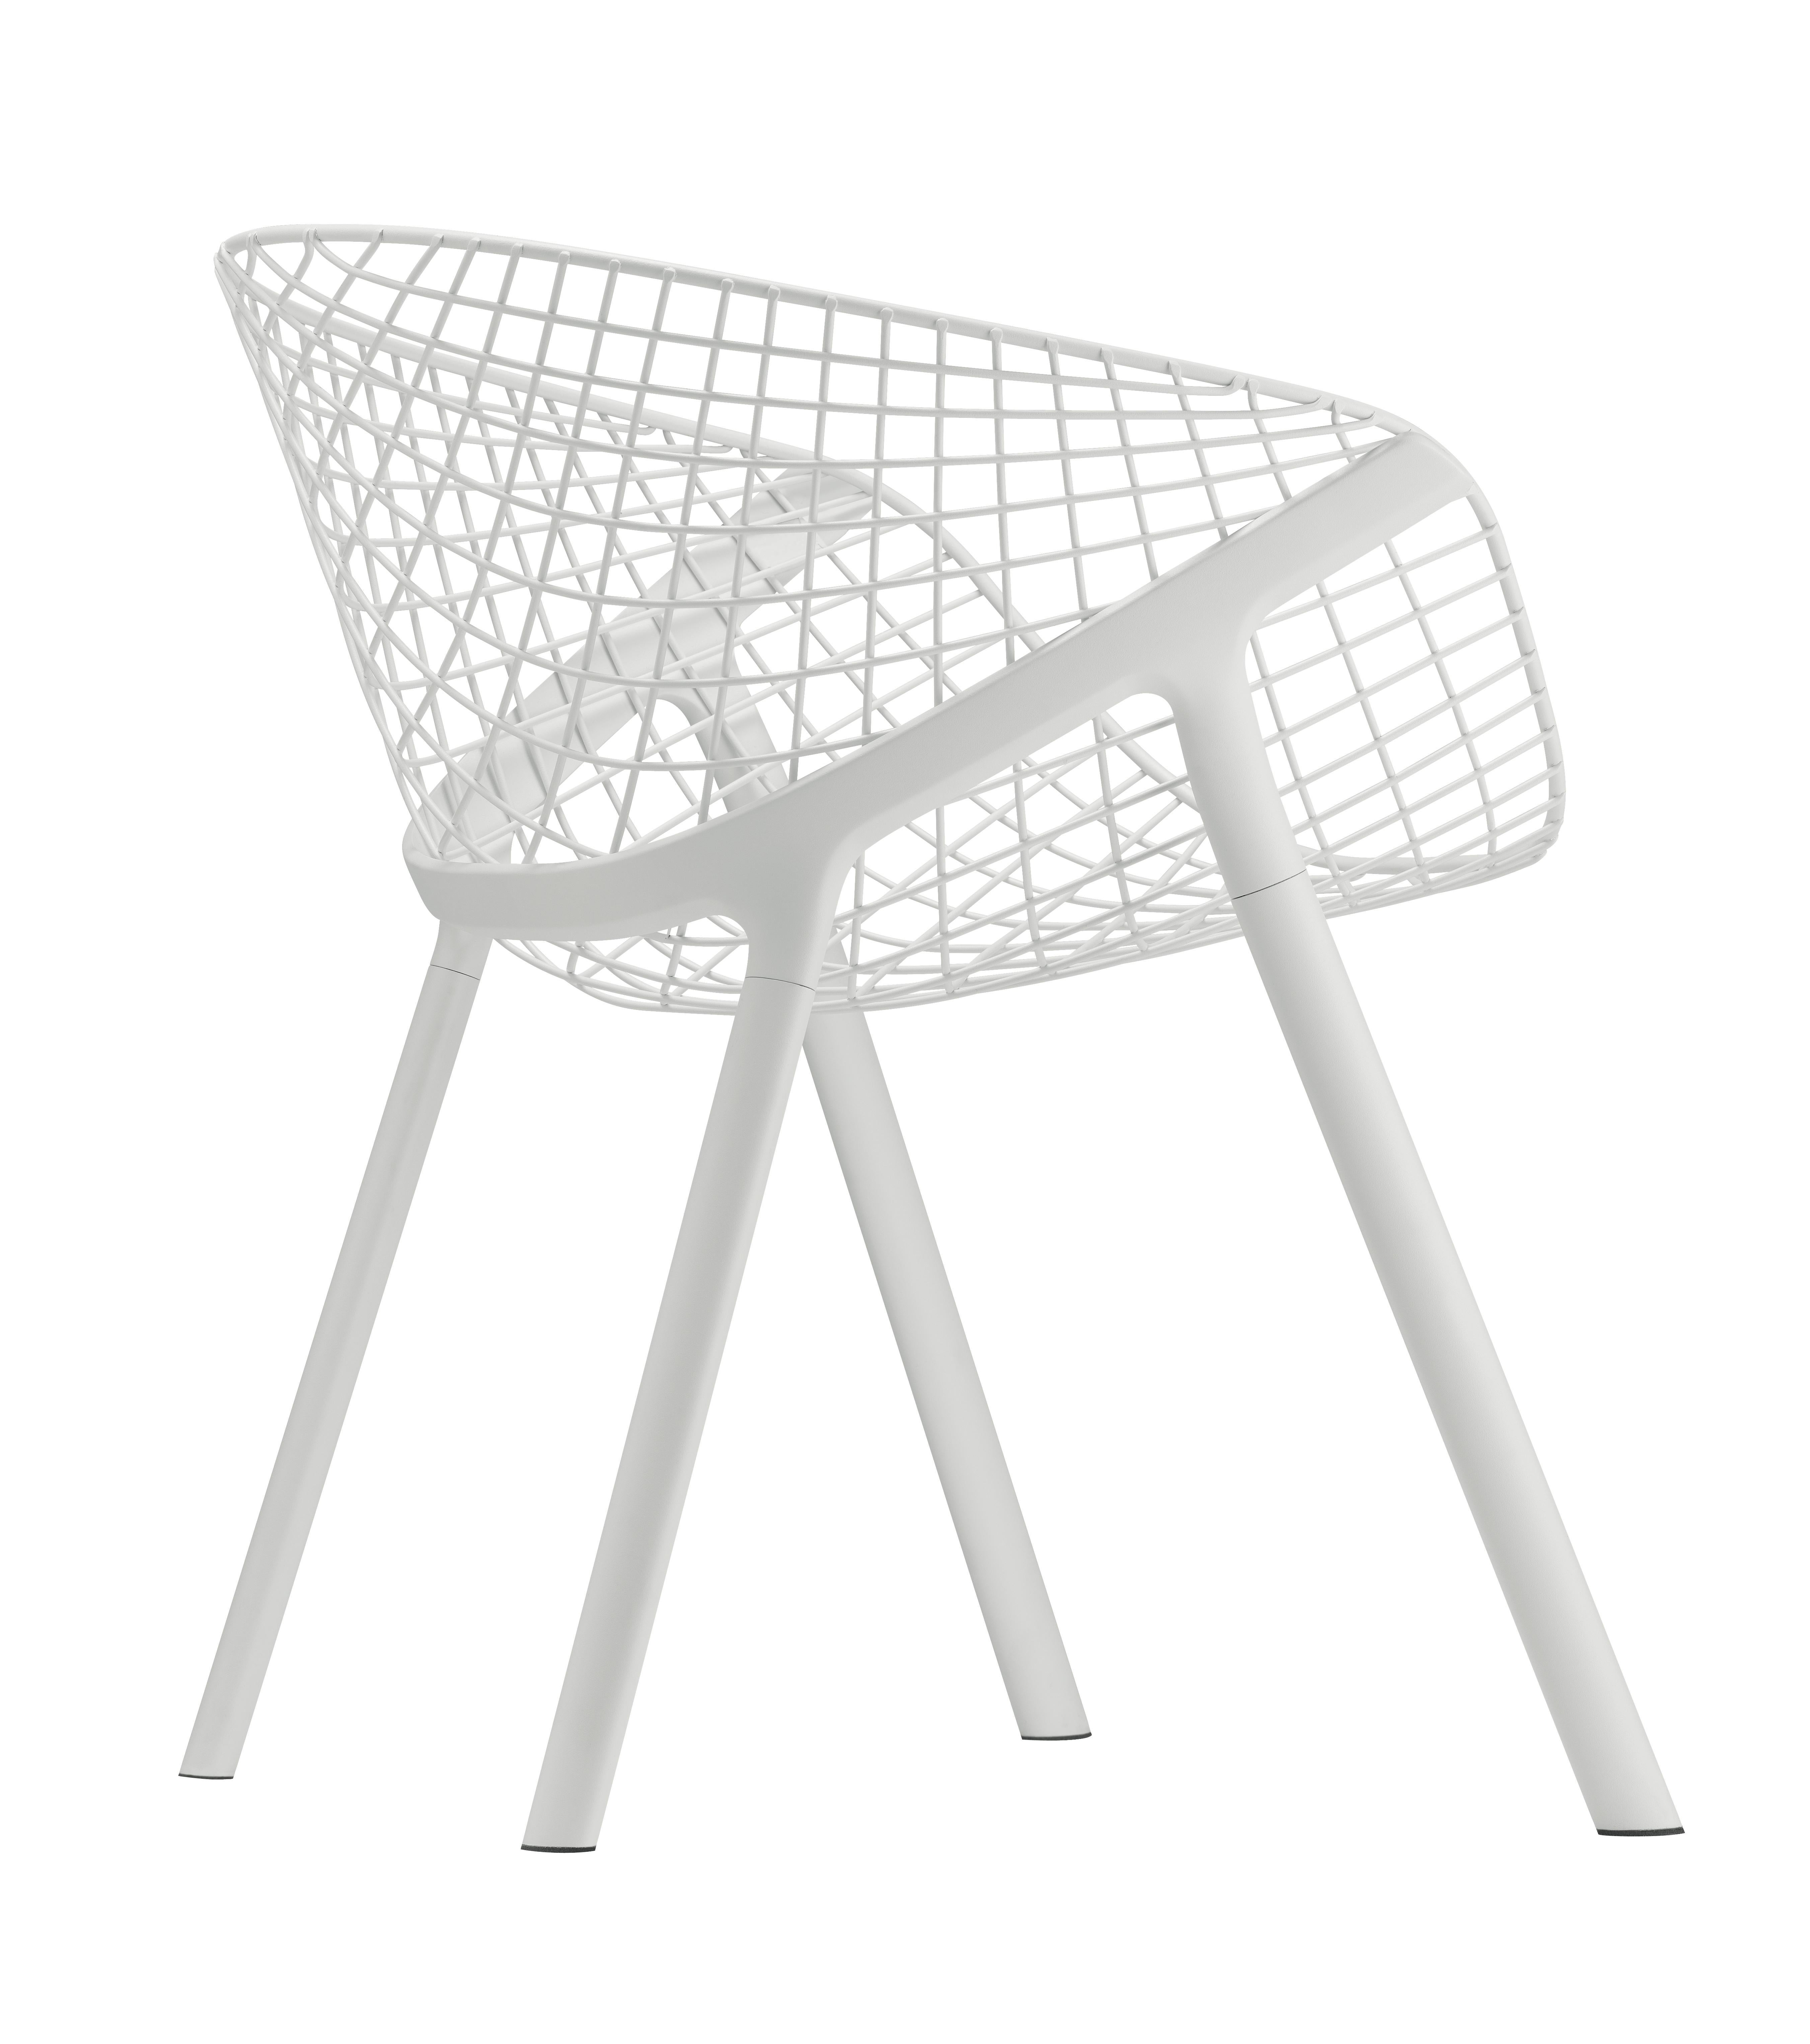 Alias 040 Kobi Chair in White Lacquered Aluminum Frame by Patrick Norguet

Chair with shell in lacquered steel; support belt and legs in lacquered aluminium. 

Born in Tours in 1969, he studied at the Industrial Design High School in Paris. He